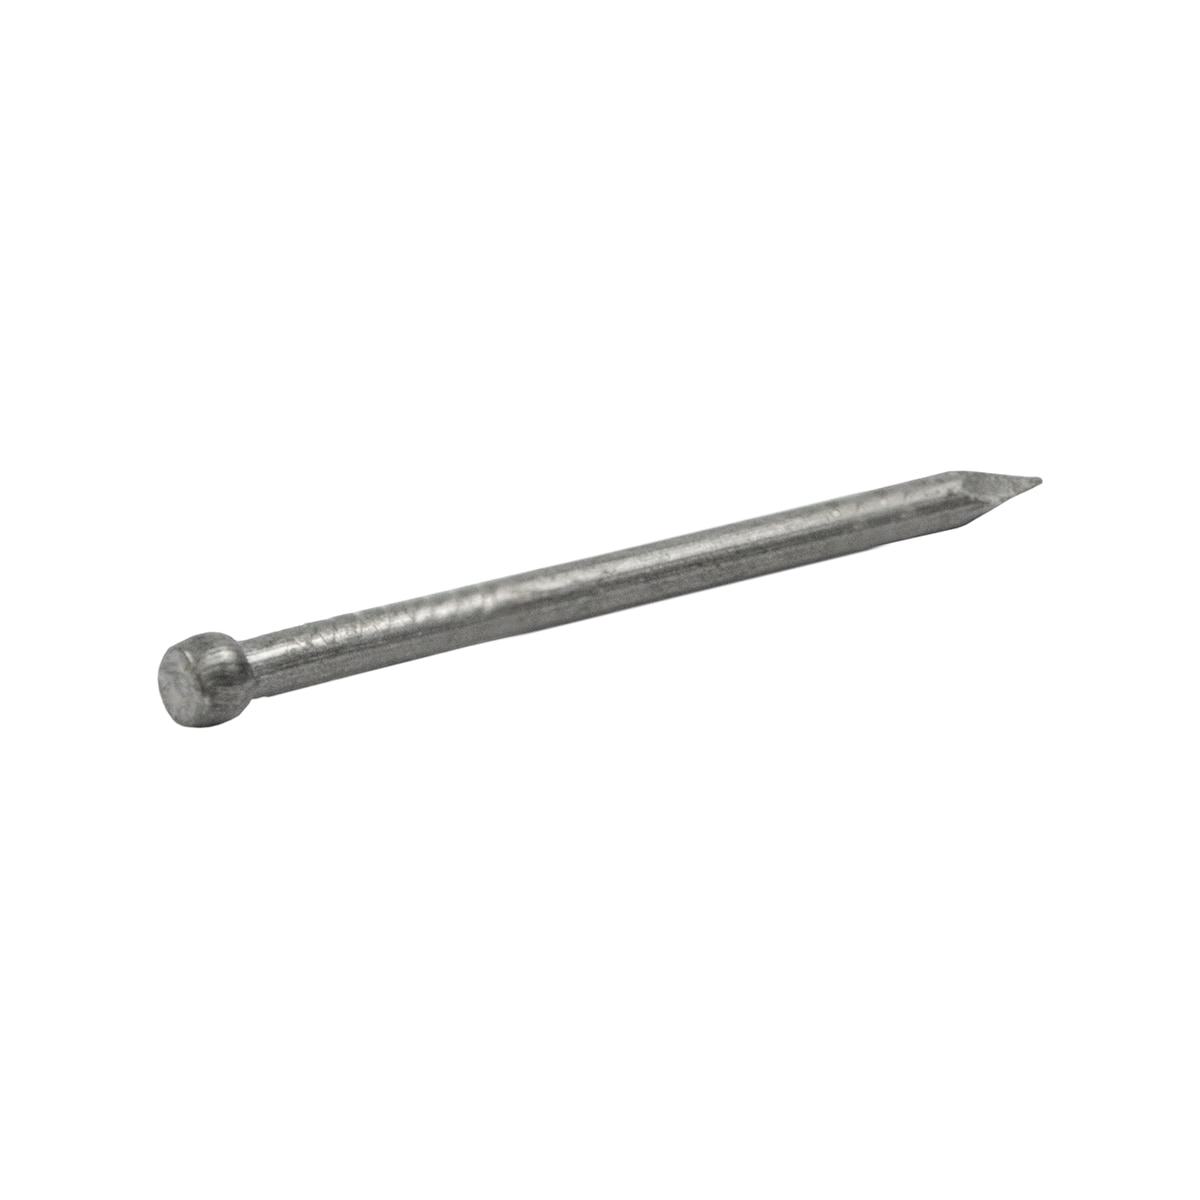 Grip-Rite 1-1/4-in 12.5-Gauge Coated Trim Nails (1020-Per Box) in the Brads  & Finish Nails department at Lowes.com